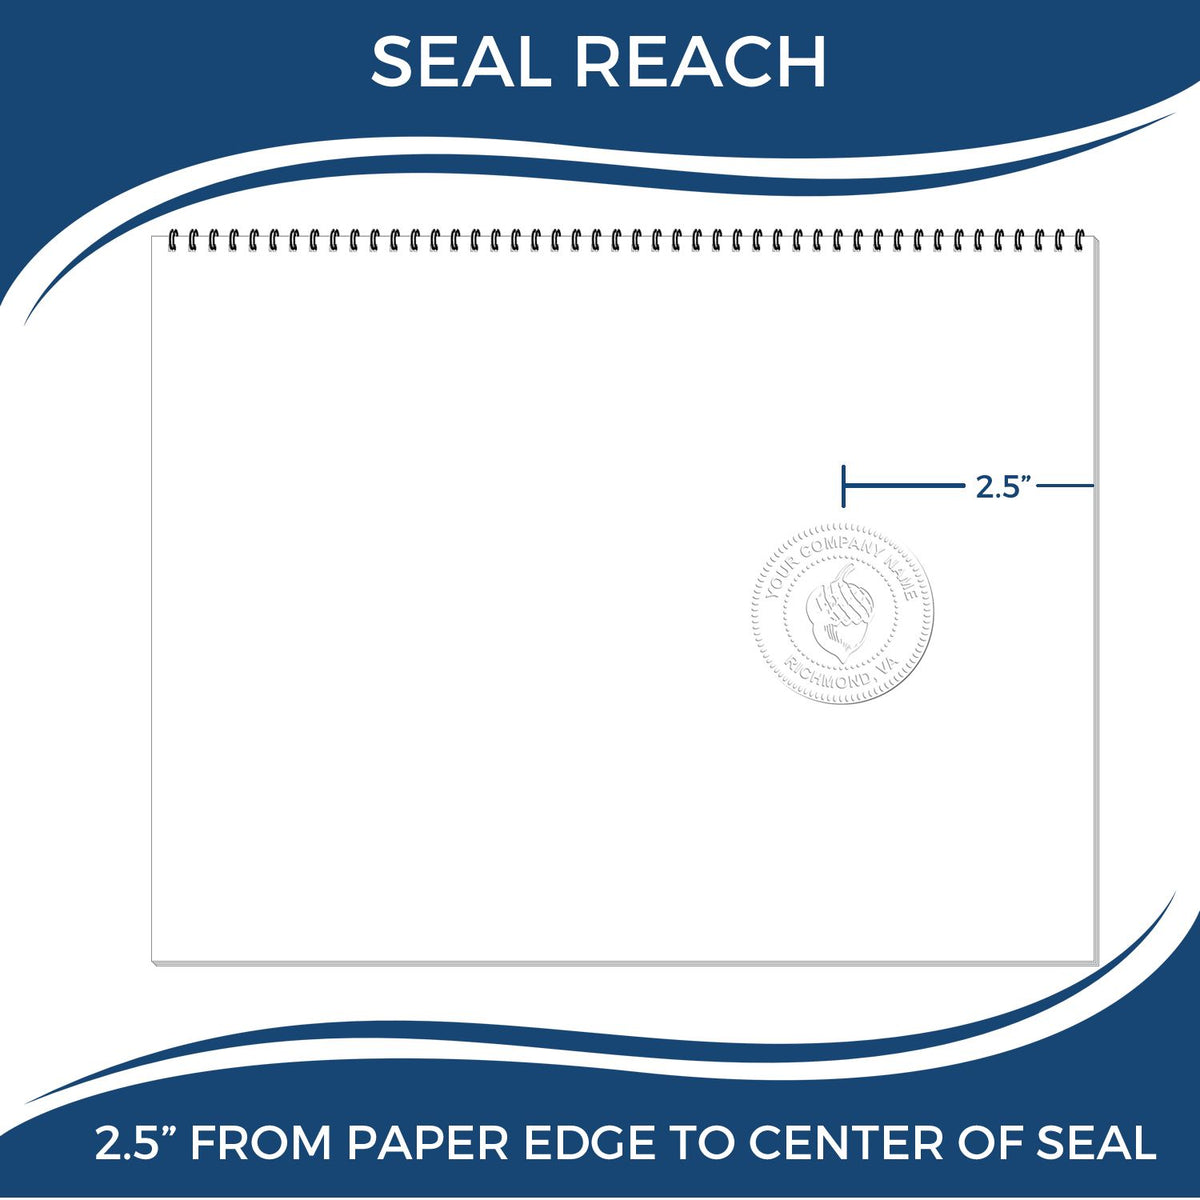 An infographic showing the seal reach which is represented by a ruler and a miniature seal image of the Heavy Duty Cast Iron Washington Engineer Seal Embosser